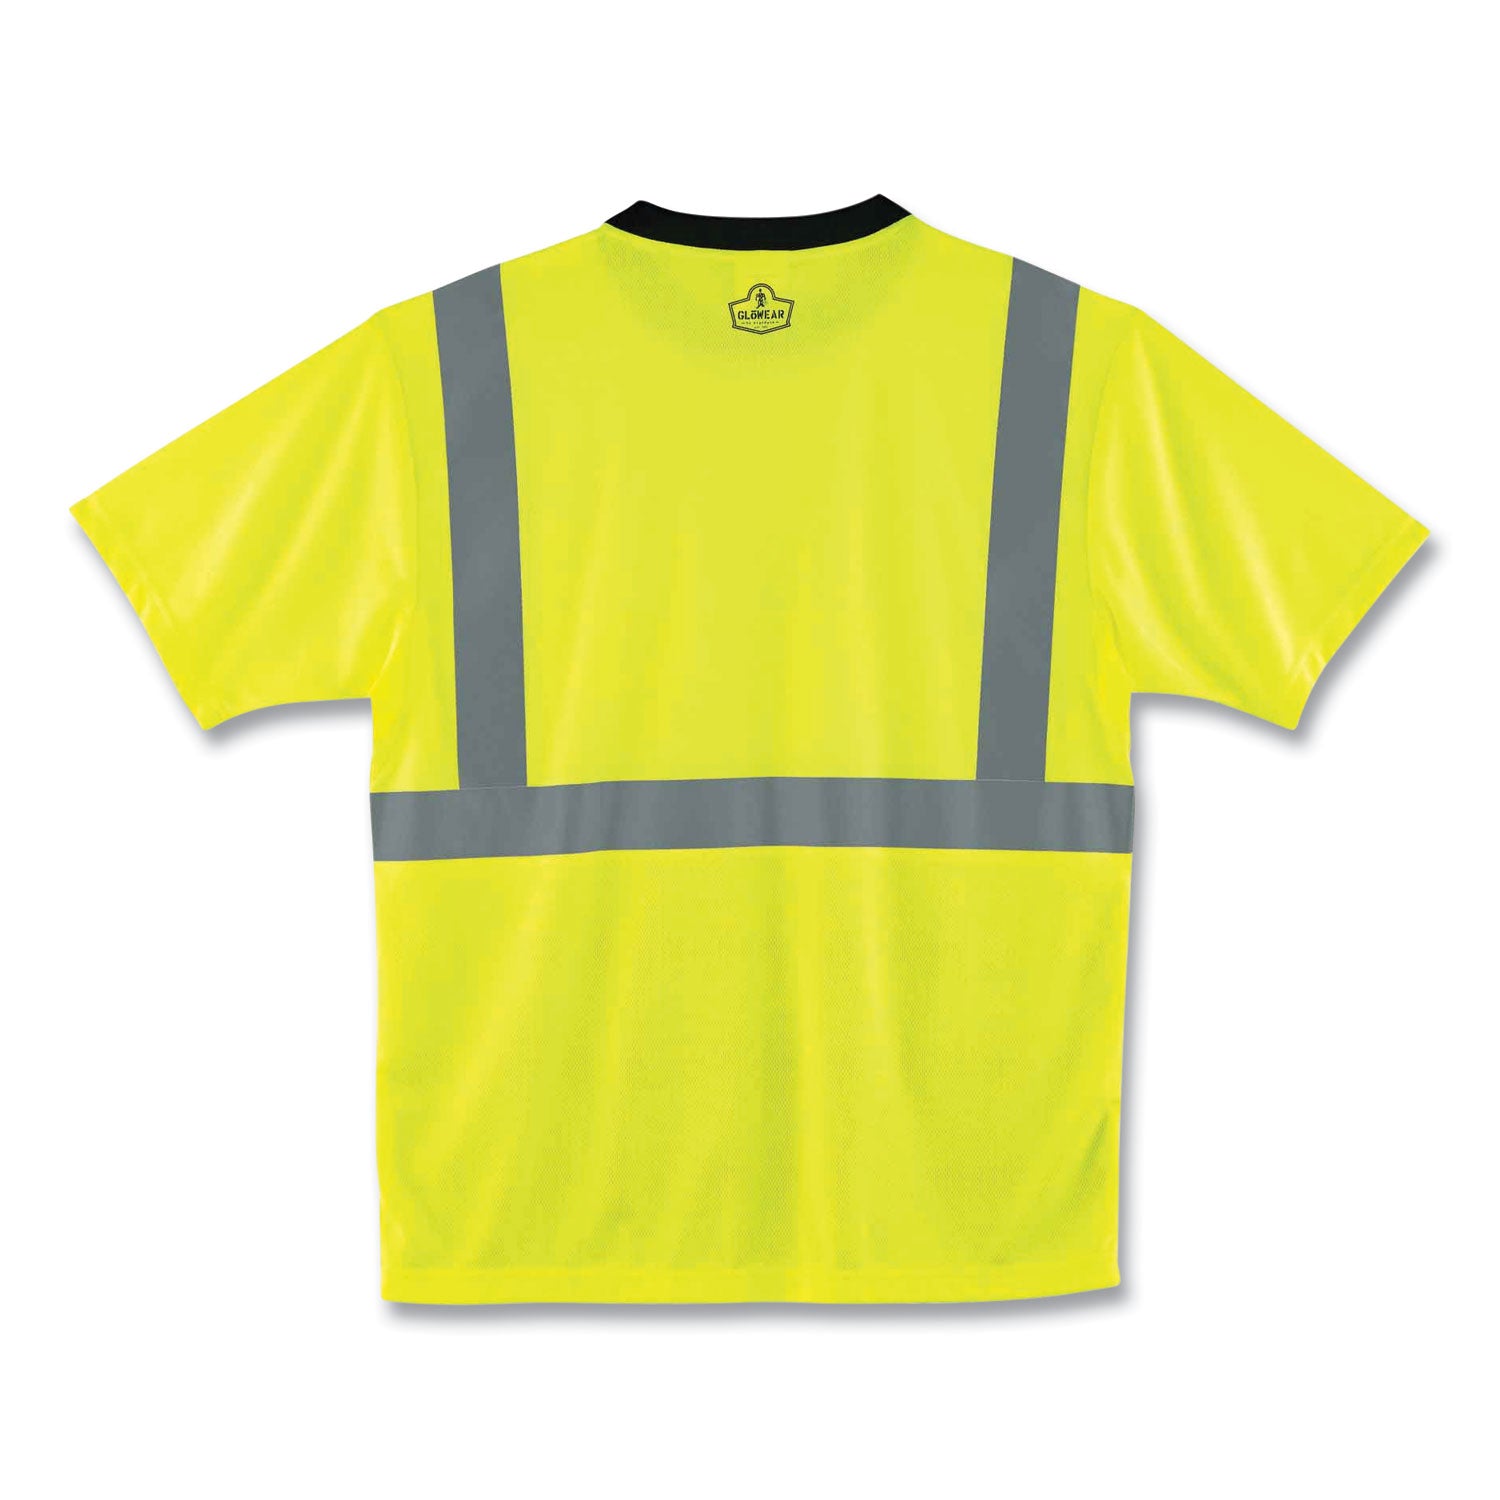 glowear-8289bk-class-2-hi-vis-t-shirt-with-black-bottom-small-lime-ships-in-1-3-business-days_ego22502 - 2